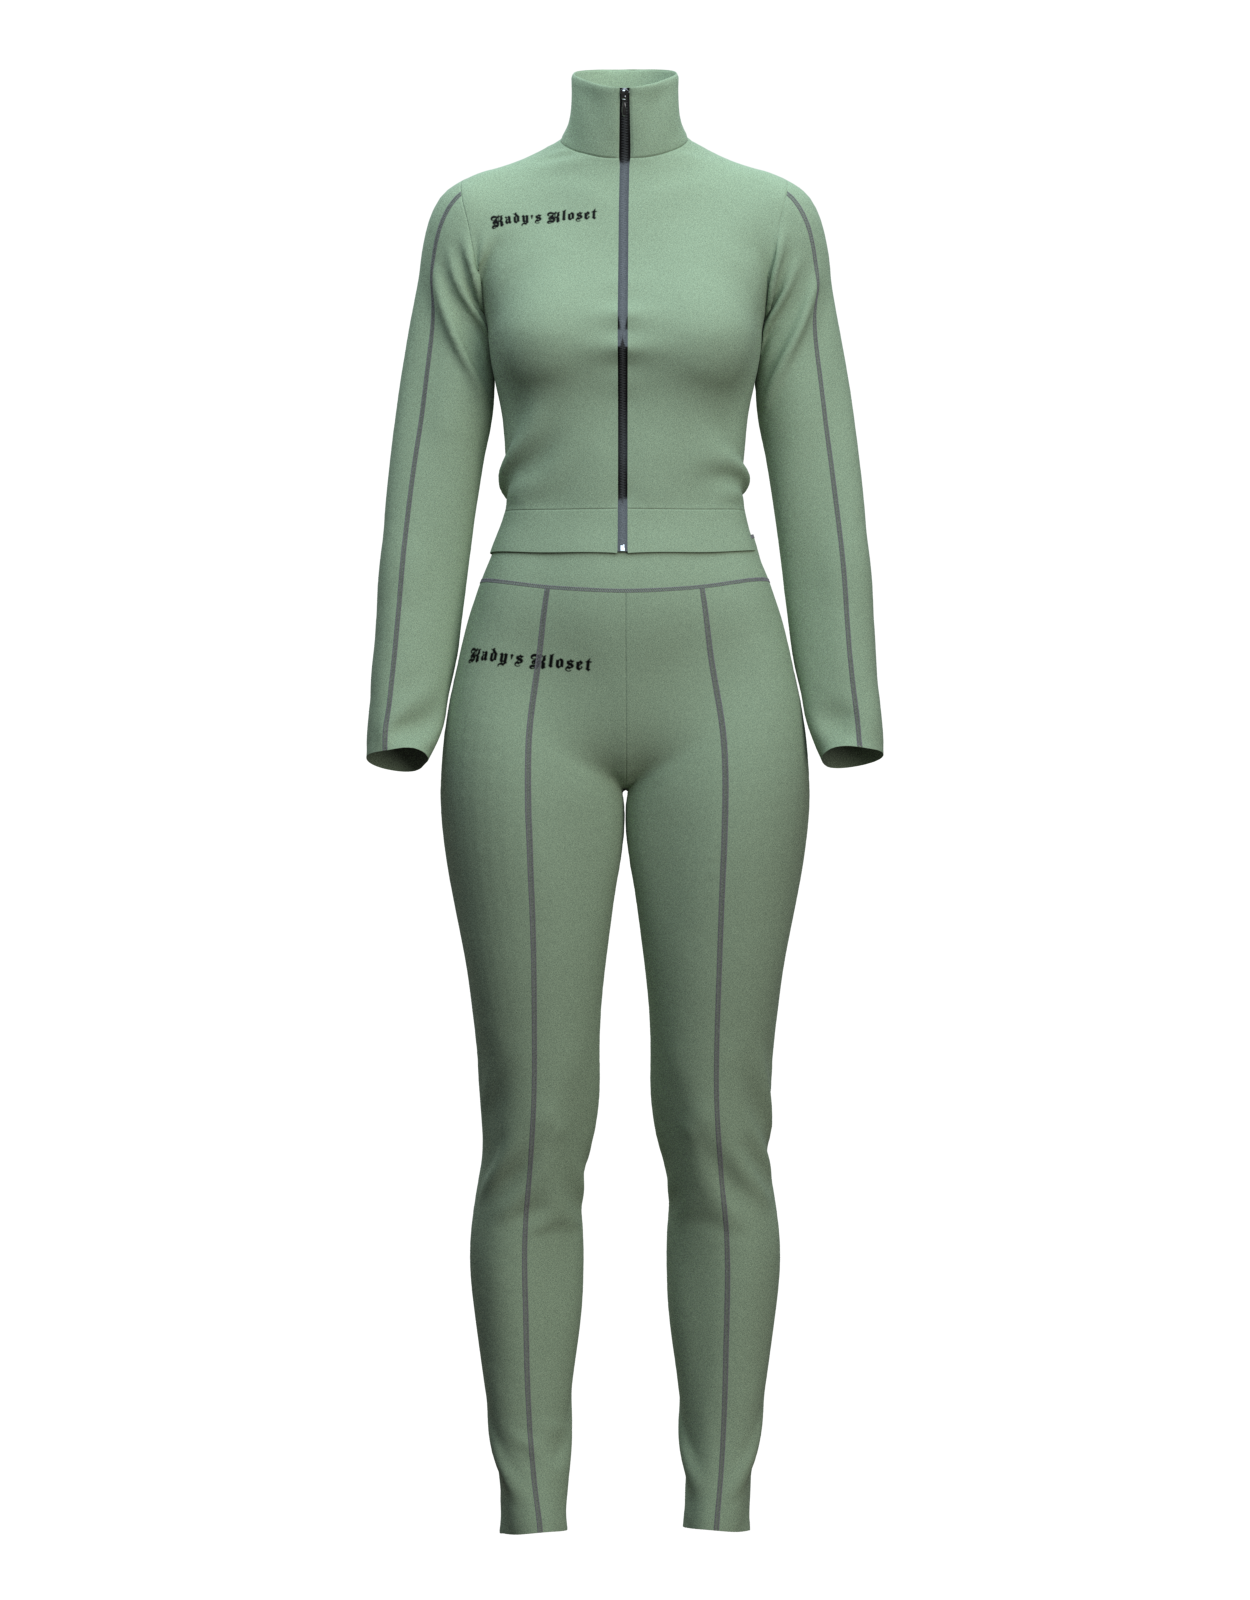 Step up your athleisure game with our Track Star Suit 2.0 pants